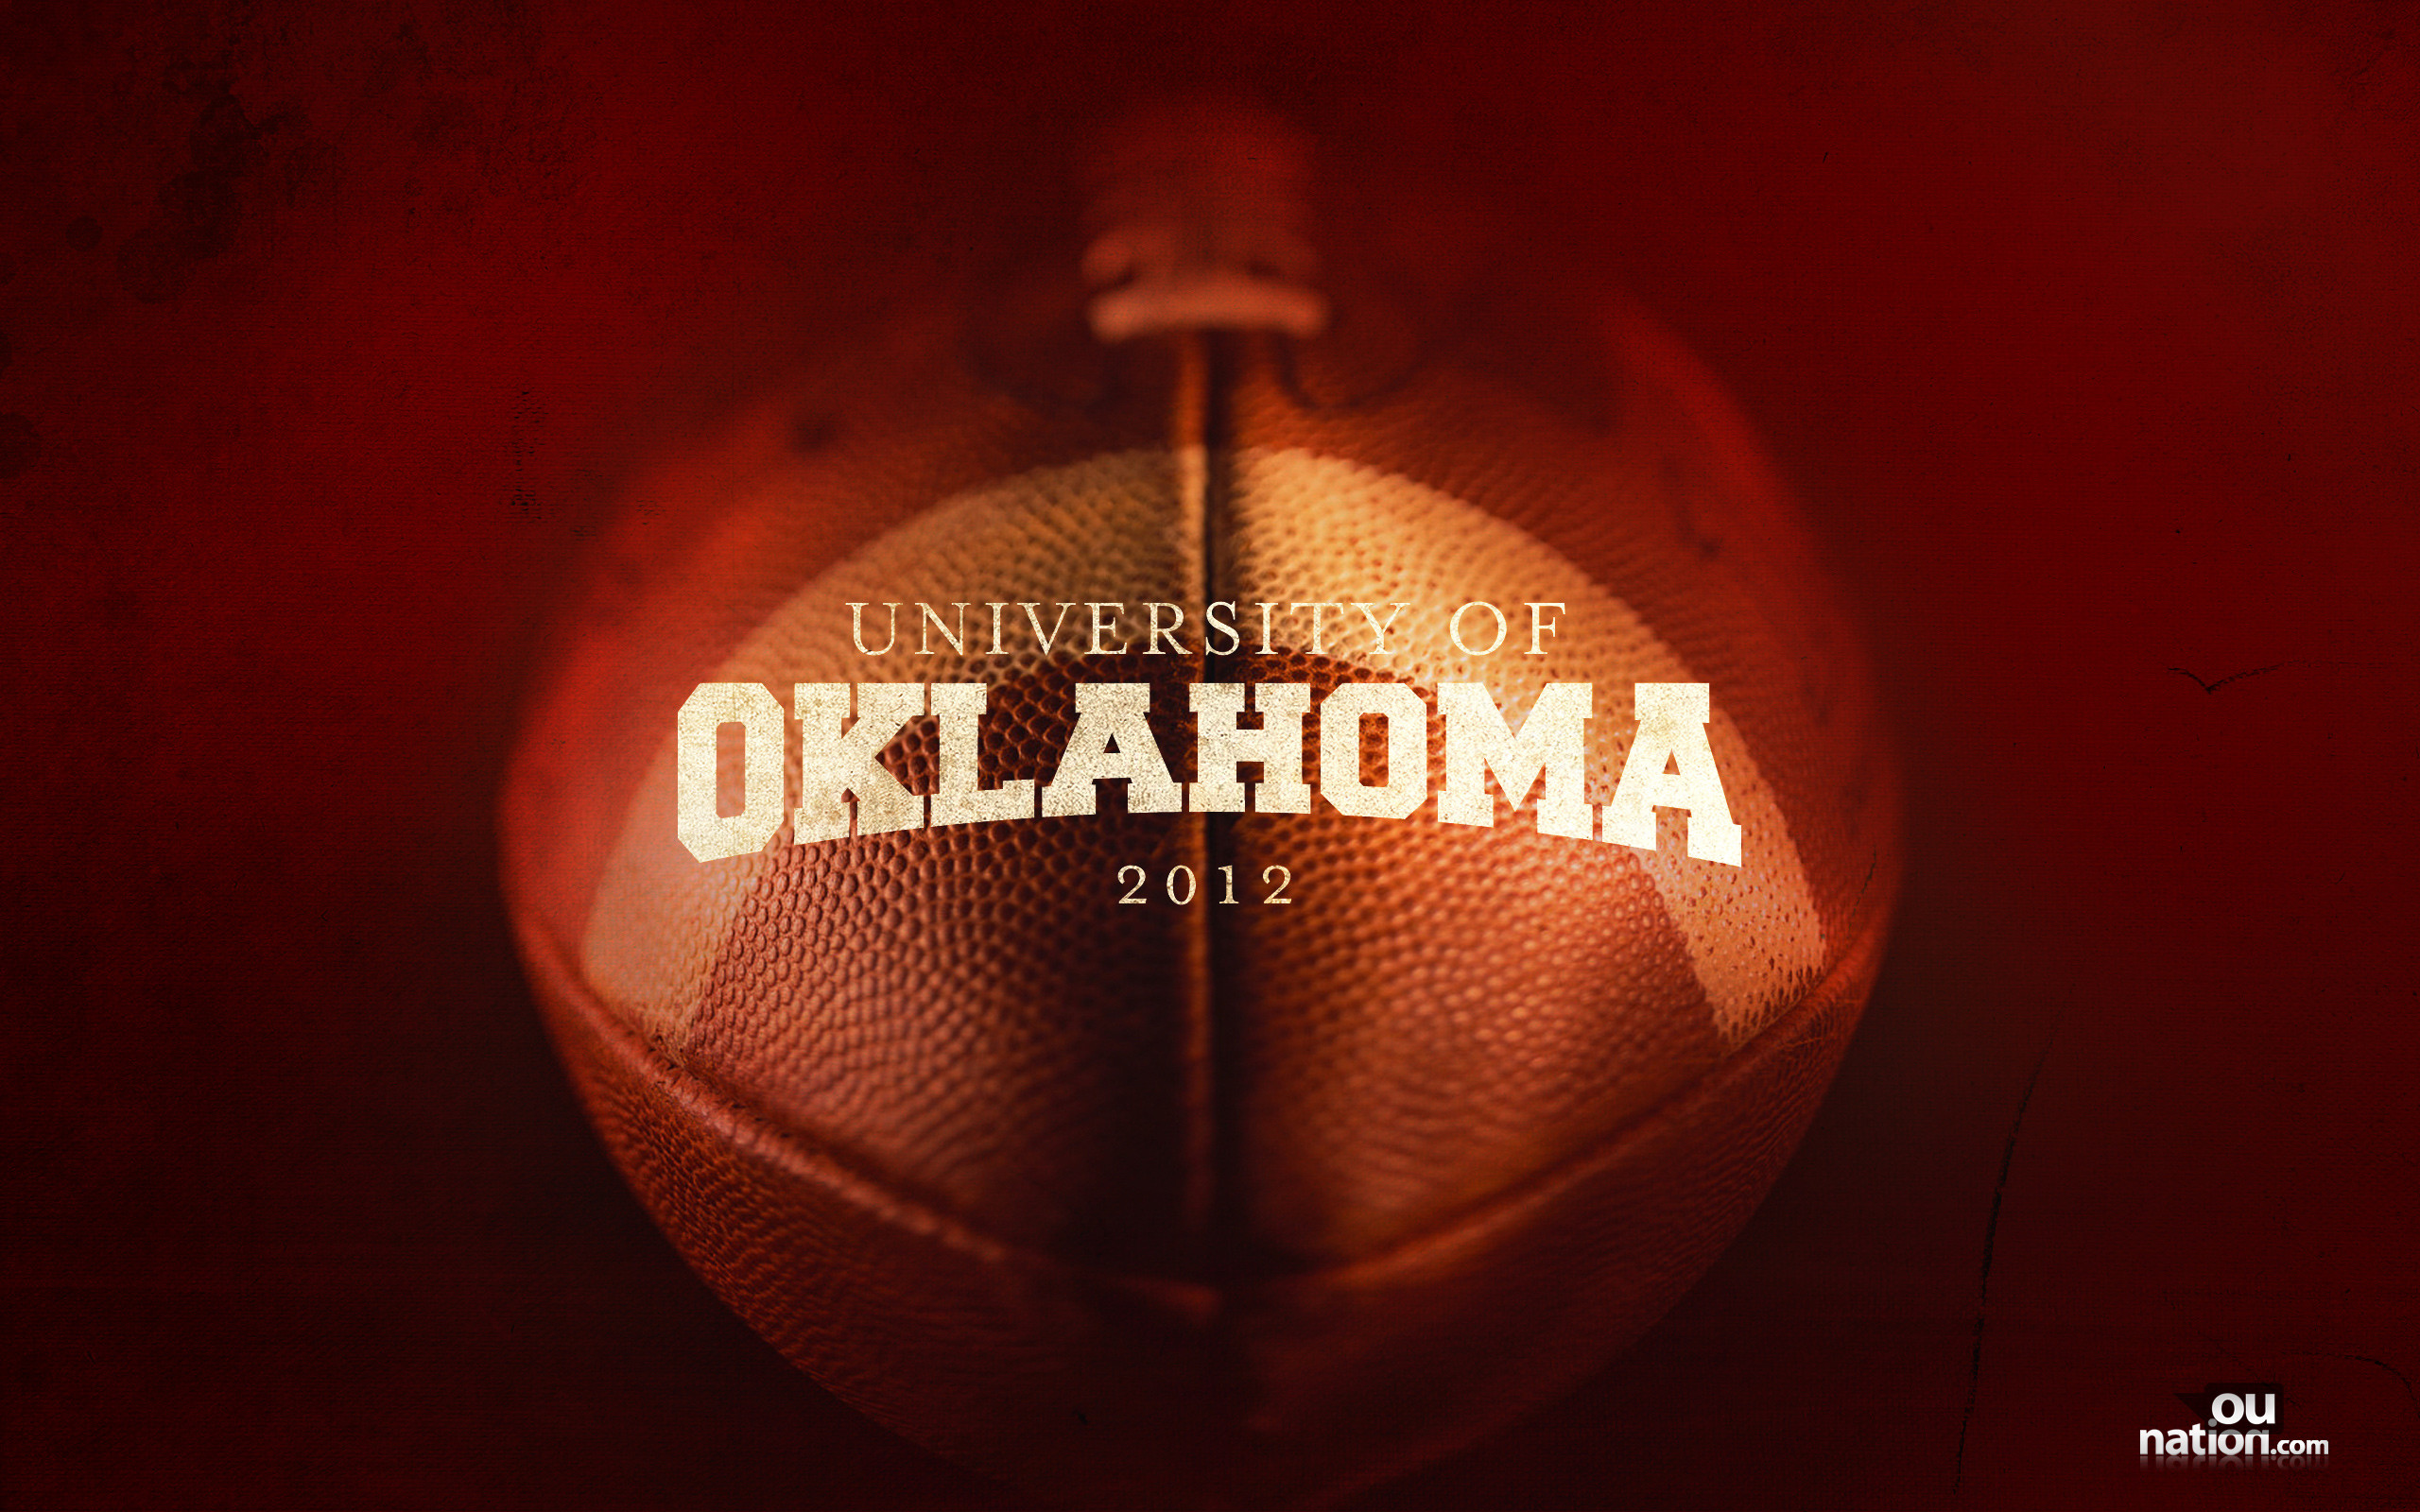 University Of Oklahoma Themed Wallpapers Free For Download - HD Wallpaper 